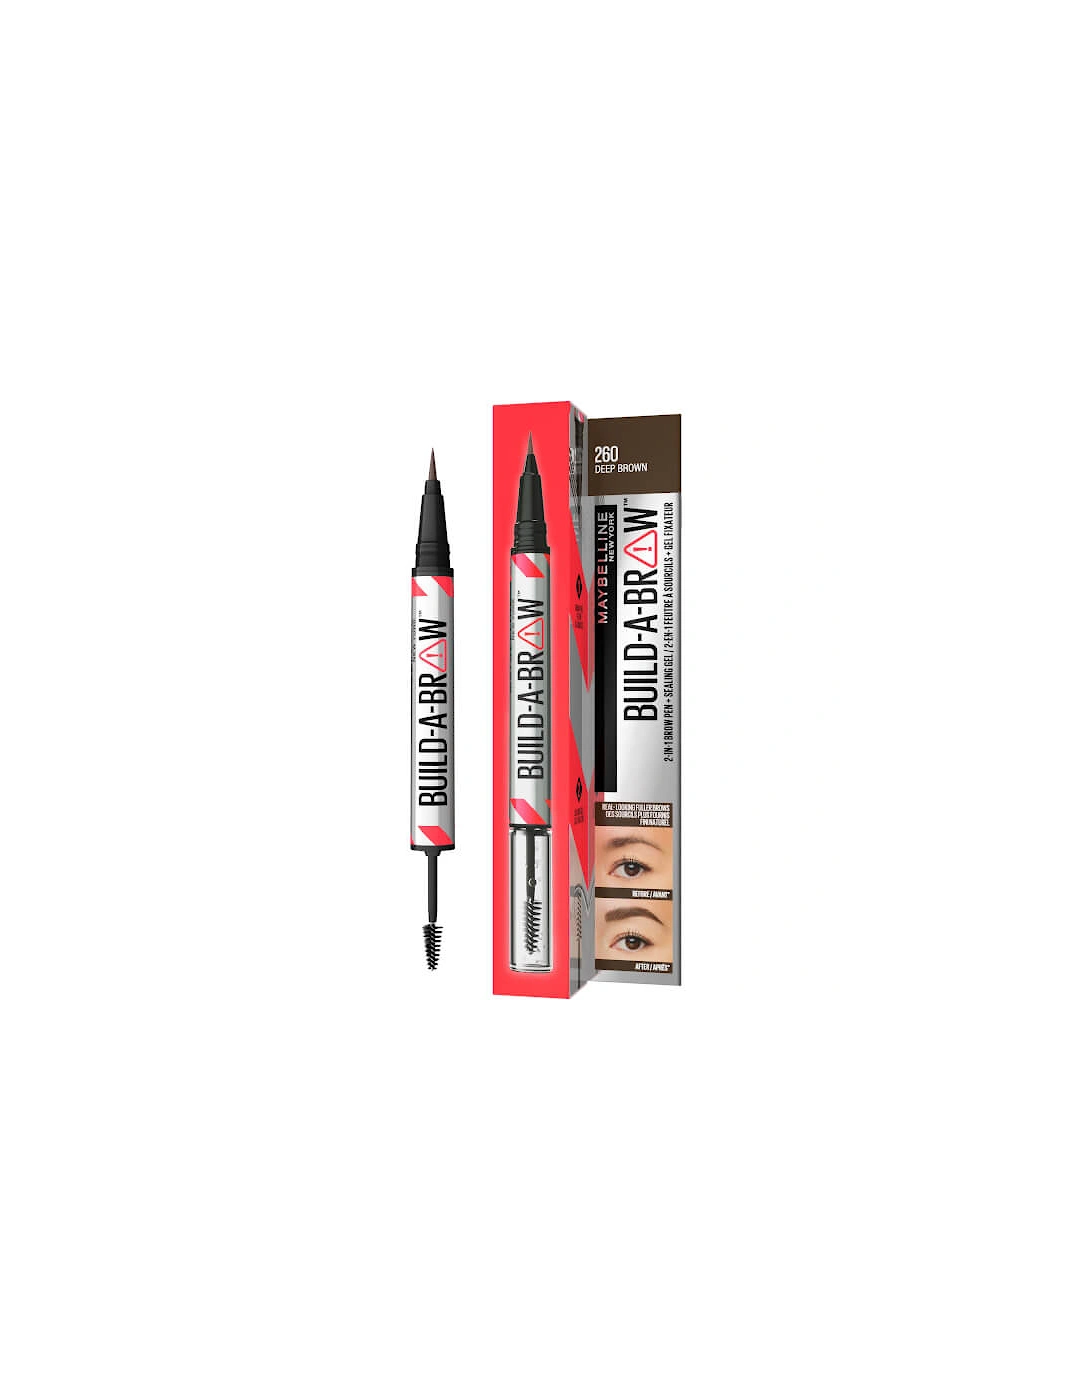 Build-A-Brow 2 Easy Steps Eye Brow Pencil and Gel - Deep Brown, 2 of 1